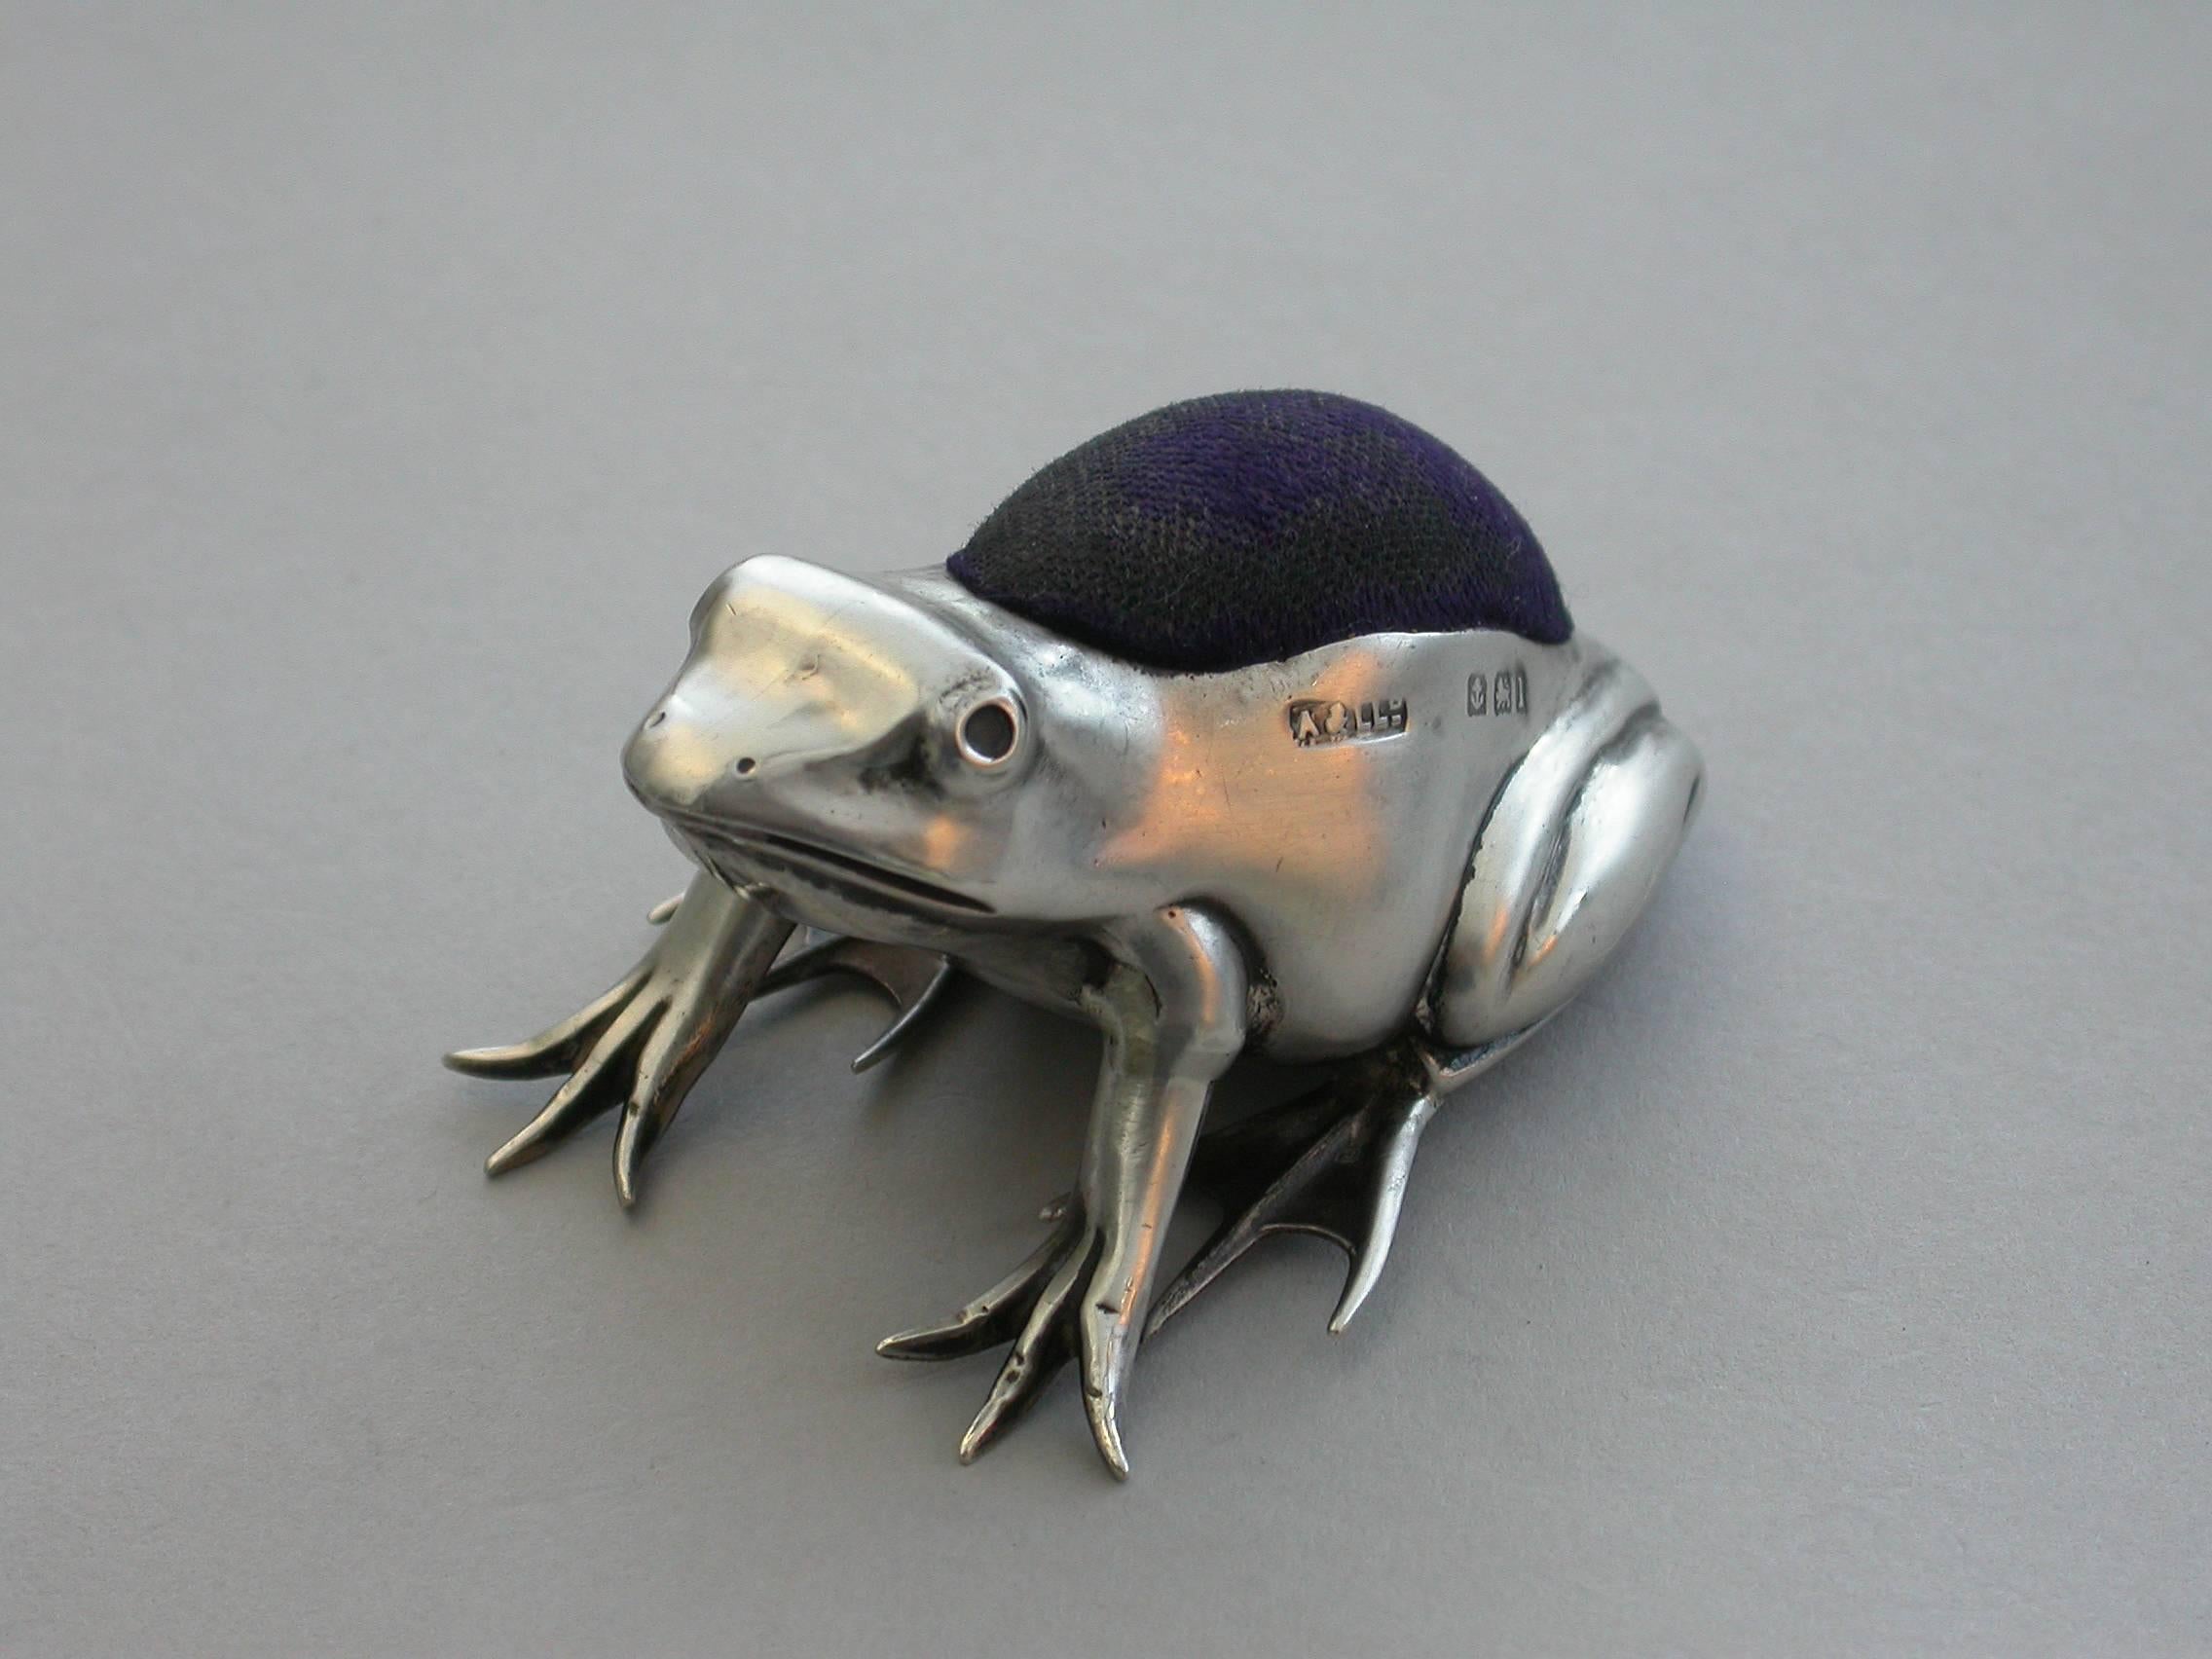 A good Edwardian novelty silver Pin Cushion made in the form of a crouching frog.

By Adie & Lovekin, Birmingham, 1910

In good condition with no damage or repair and complete with original cushion.
Measures:
Height 28 mm (1.10 inches)
Width